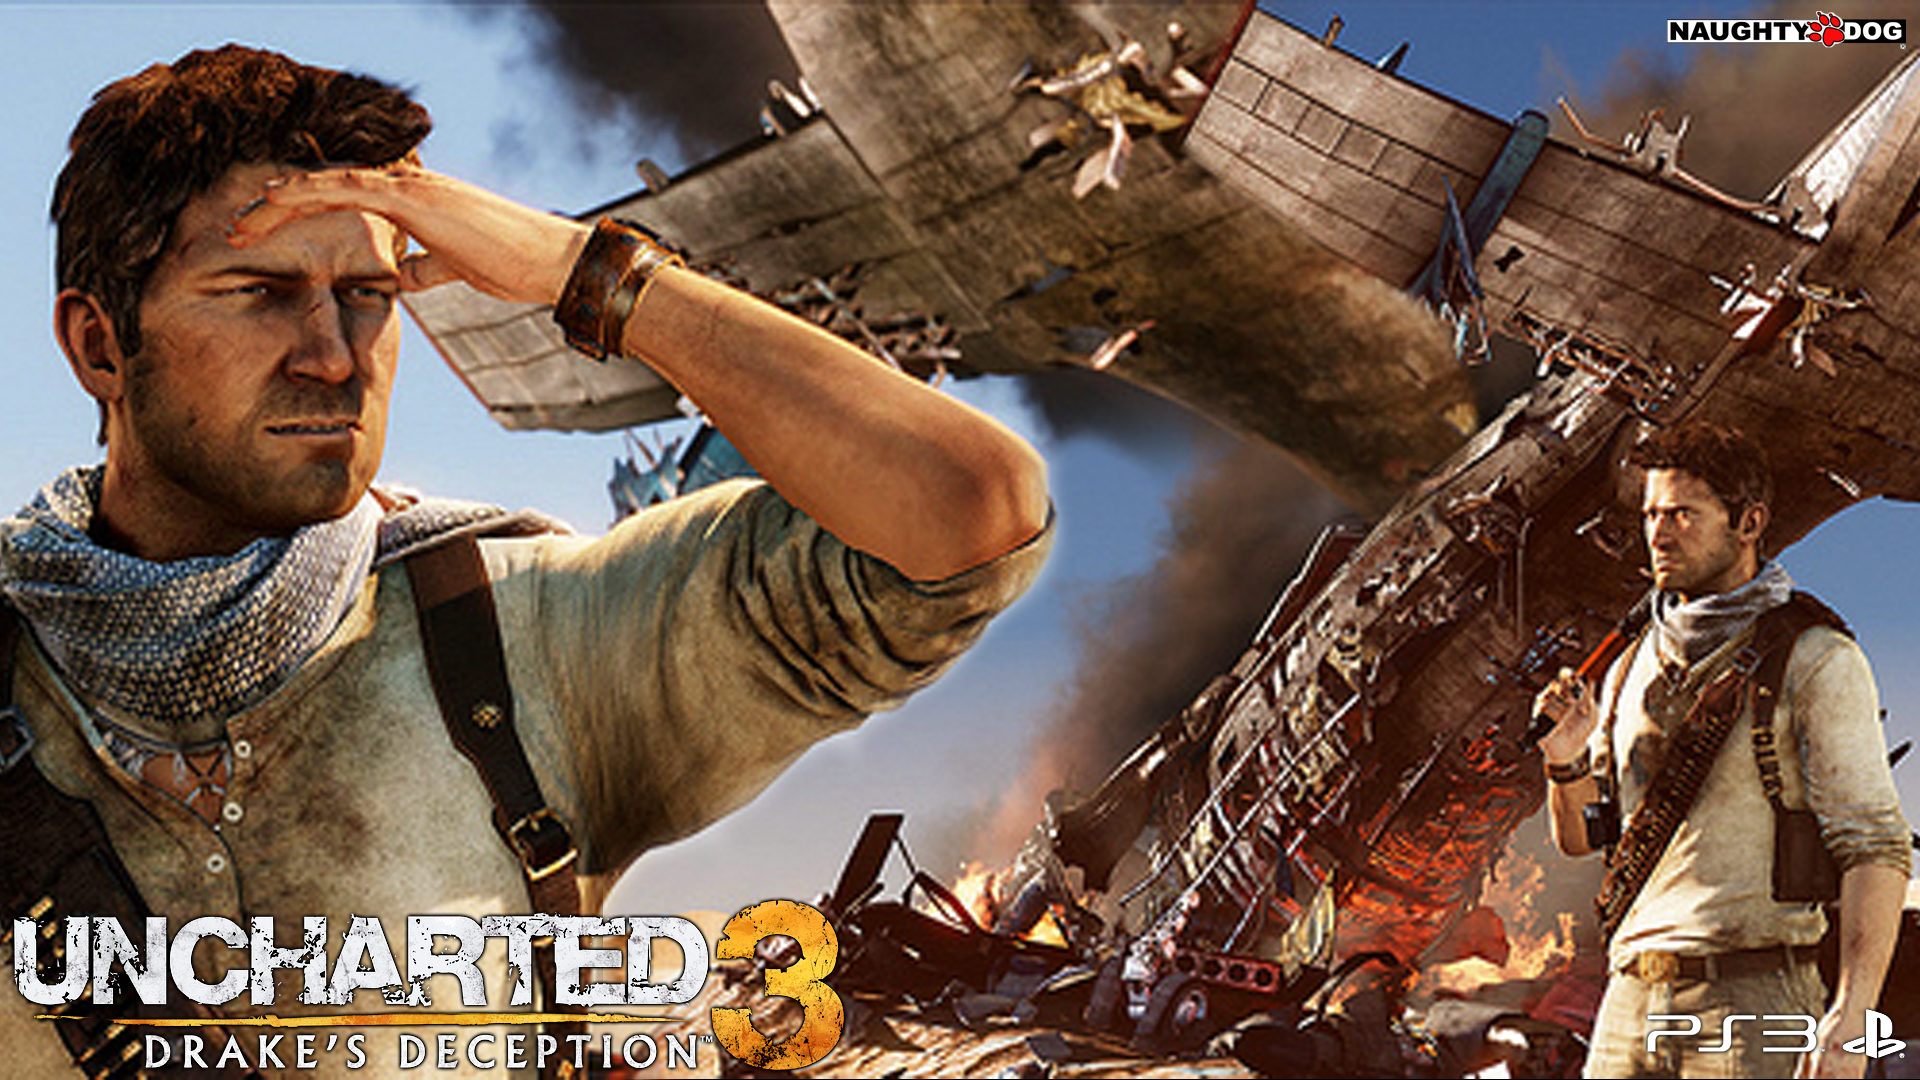 Uncharted 3: Drake's Deception Wallpapers